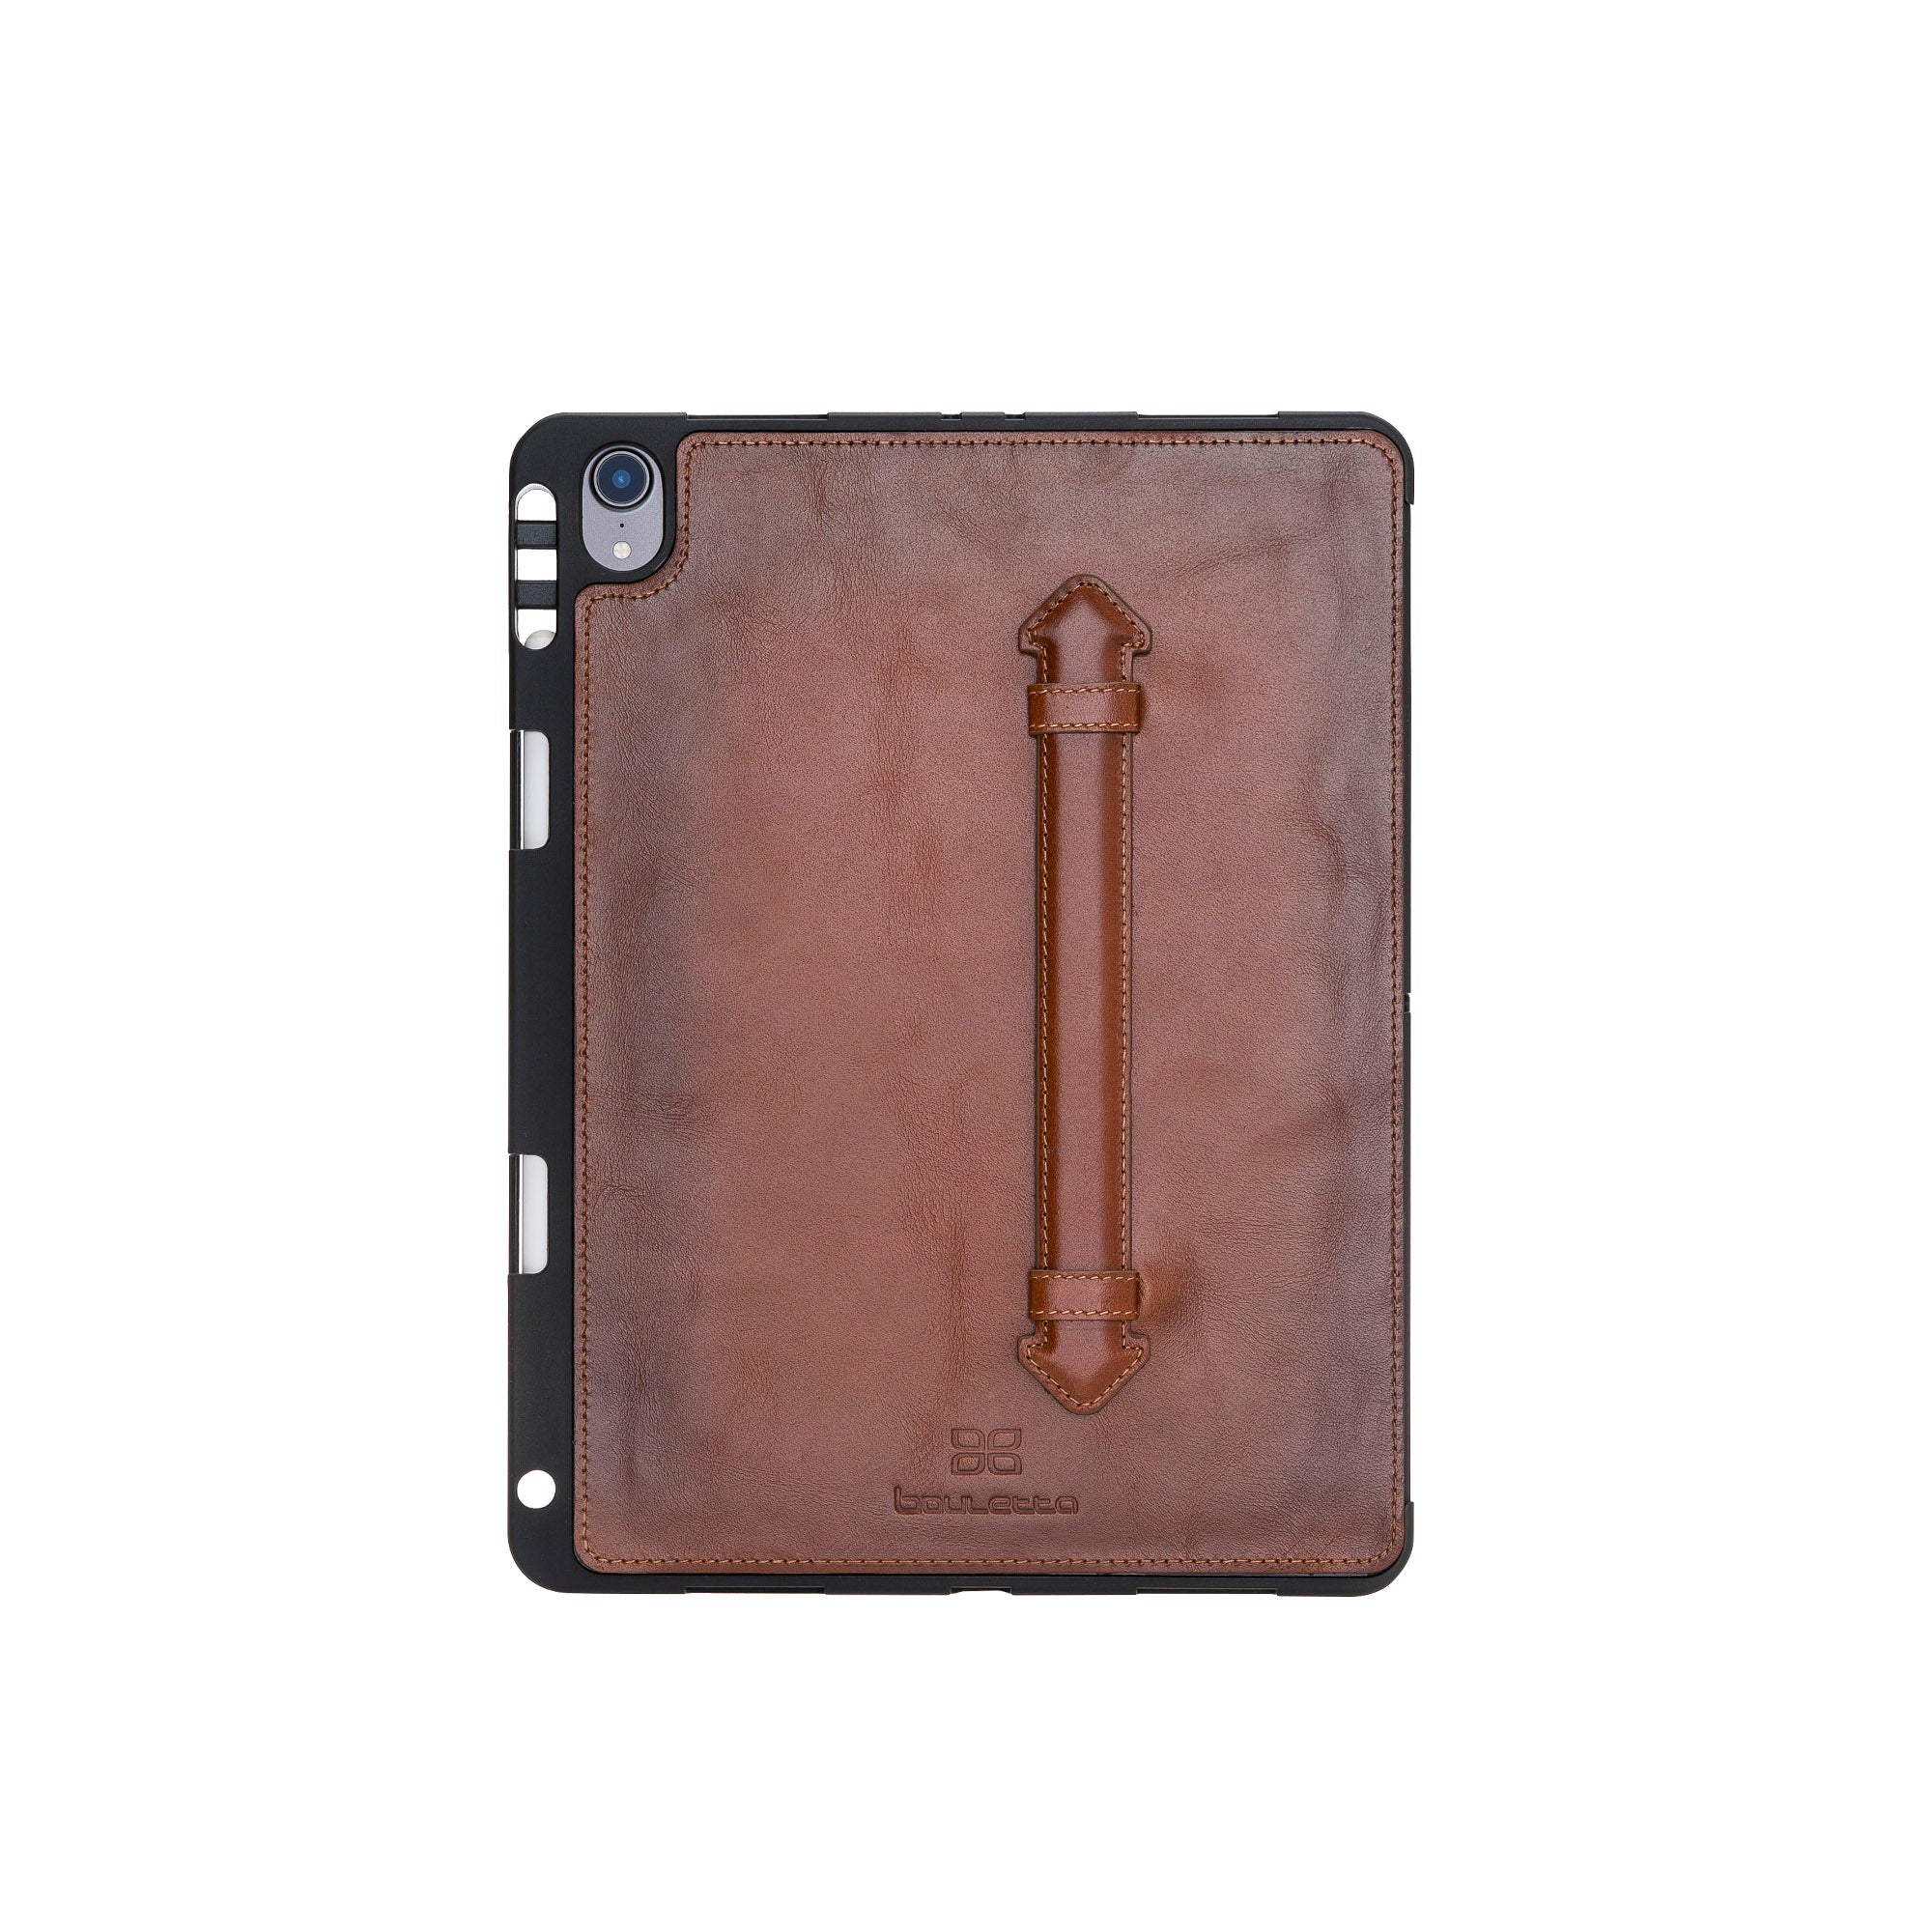 Felix Flex Cover Leather Back Case for iPad Pro 11" (2018) - TAN - saracleather